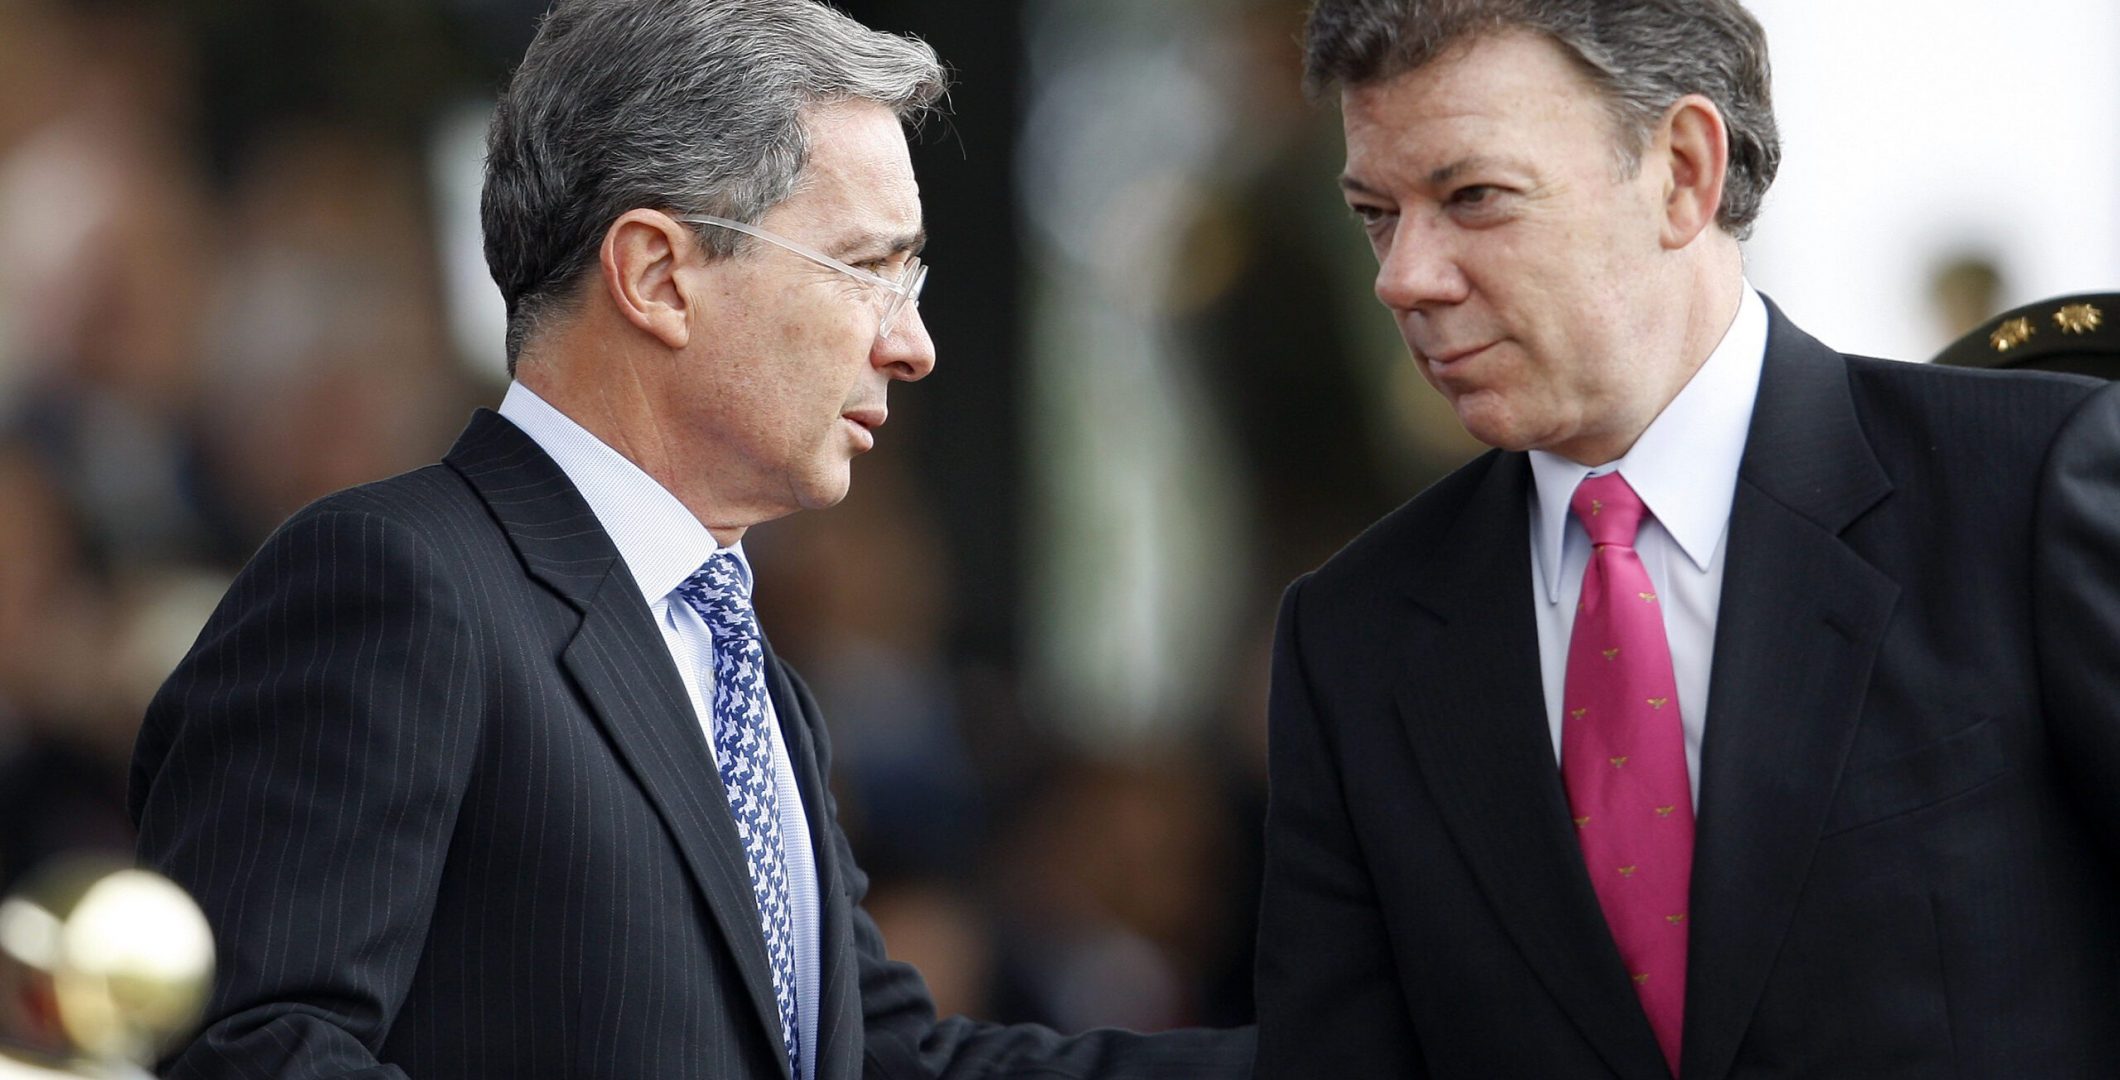 Colombian President Alvaro Uribe (L) speaks with Defense Minister Juan Manuel Santos during an army ceremony at the Police School in Bogota May 11, 2009. Santos resigned on May 18 to run for the presidency in 2010 if Uribe decides to step aside when his second term ends. Picture taken May 11, 2009.  REUTERS/Jose Miguel Gomez   (COLOMBIA POLITICS MILITARY)